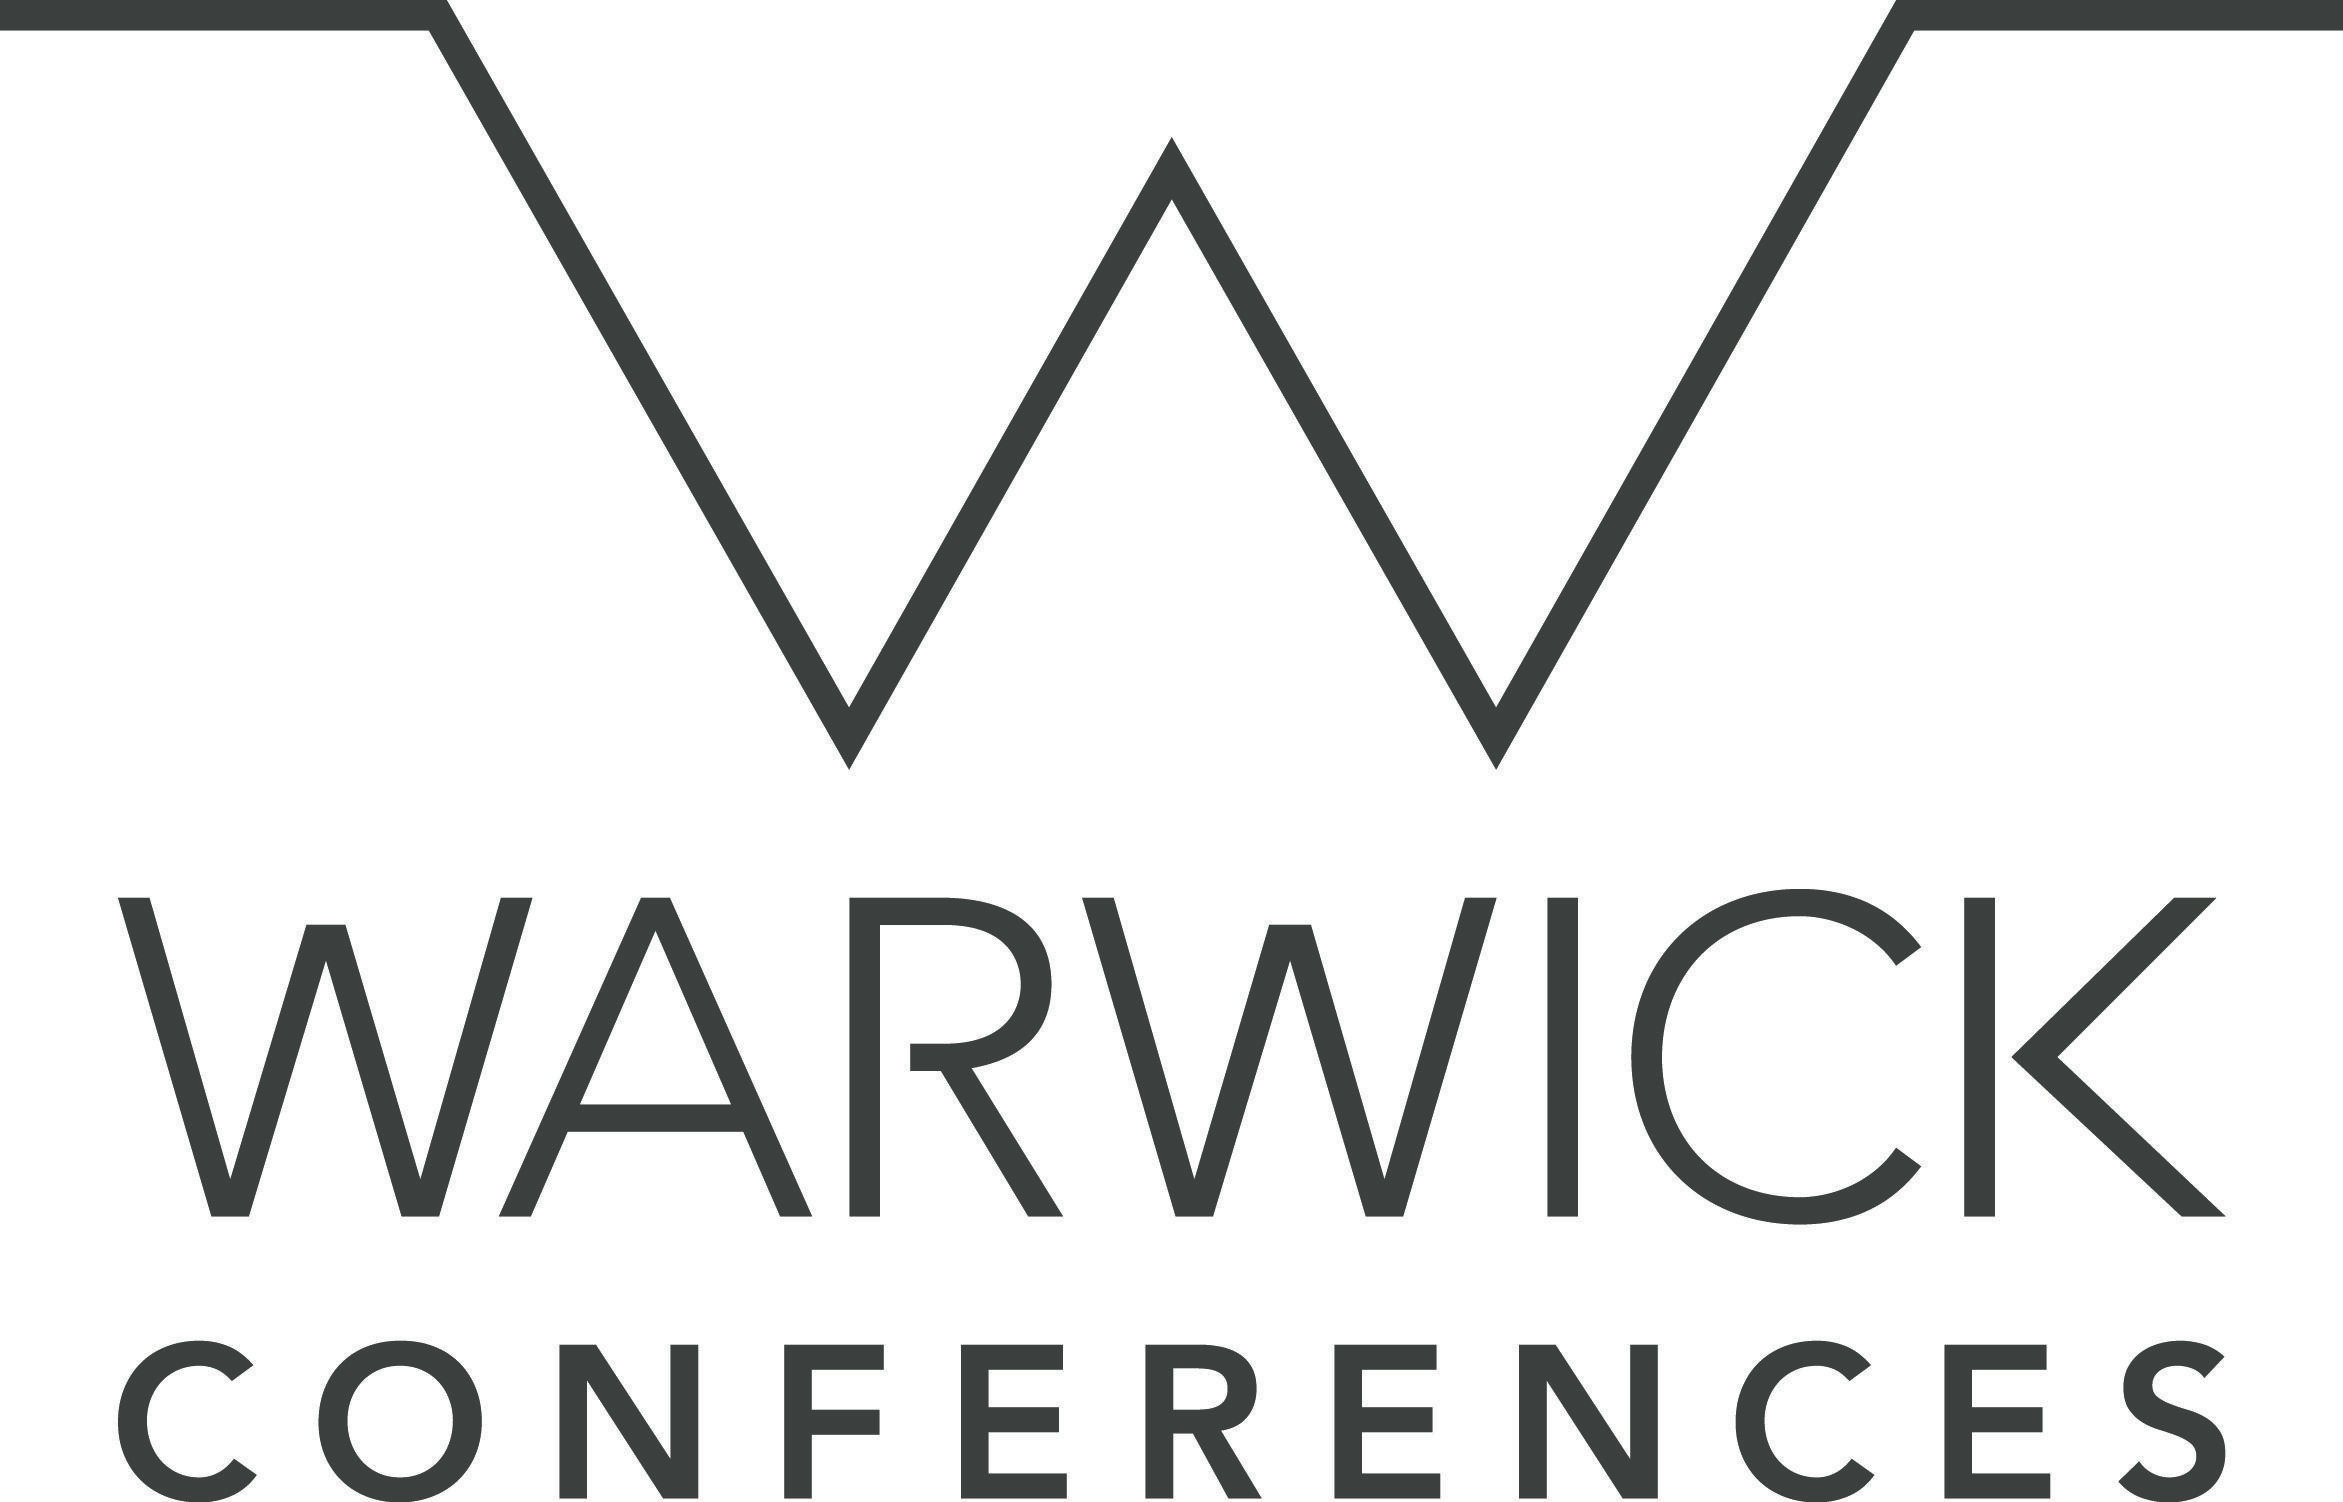 Warwick Logo - Warwick Conferences - Radcliffe in Coventry West Midlands - Meeting ...